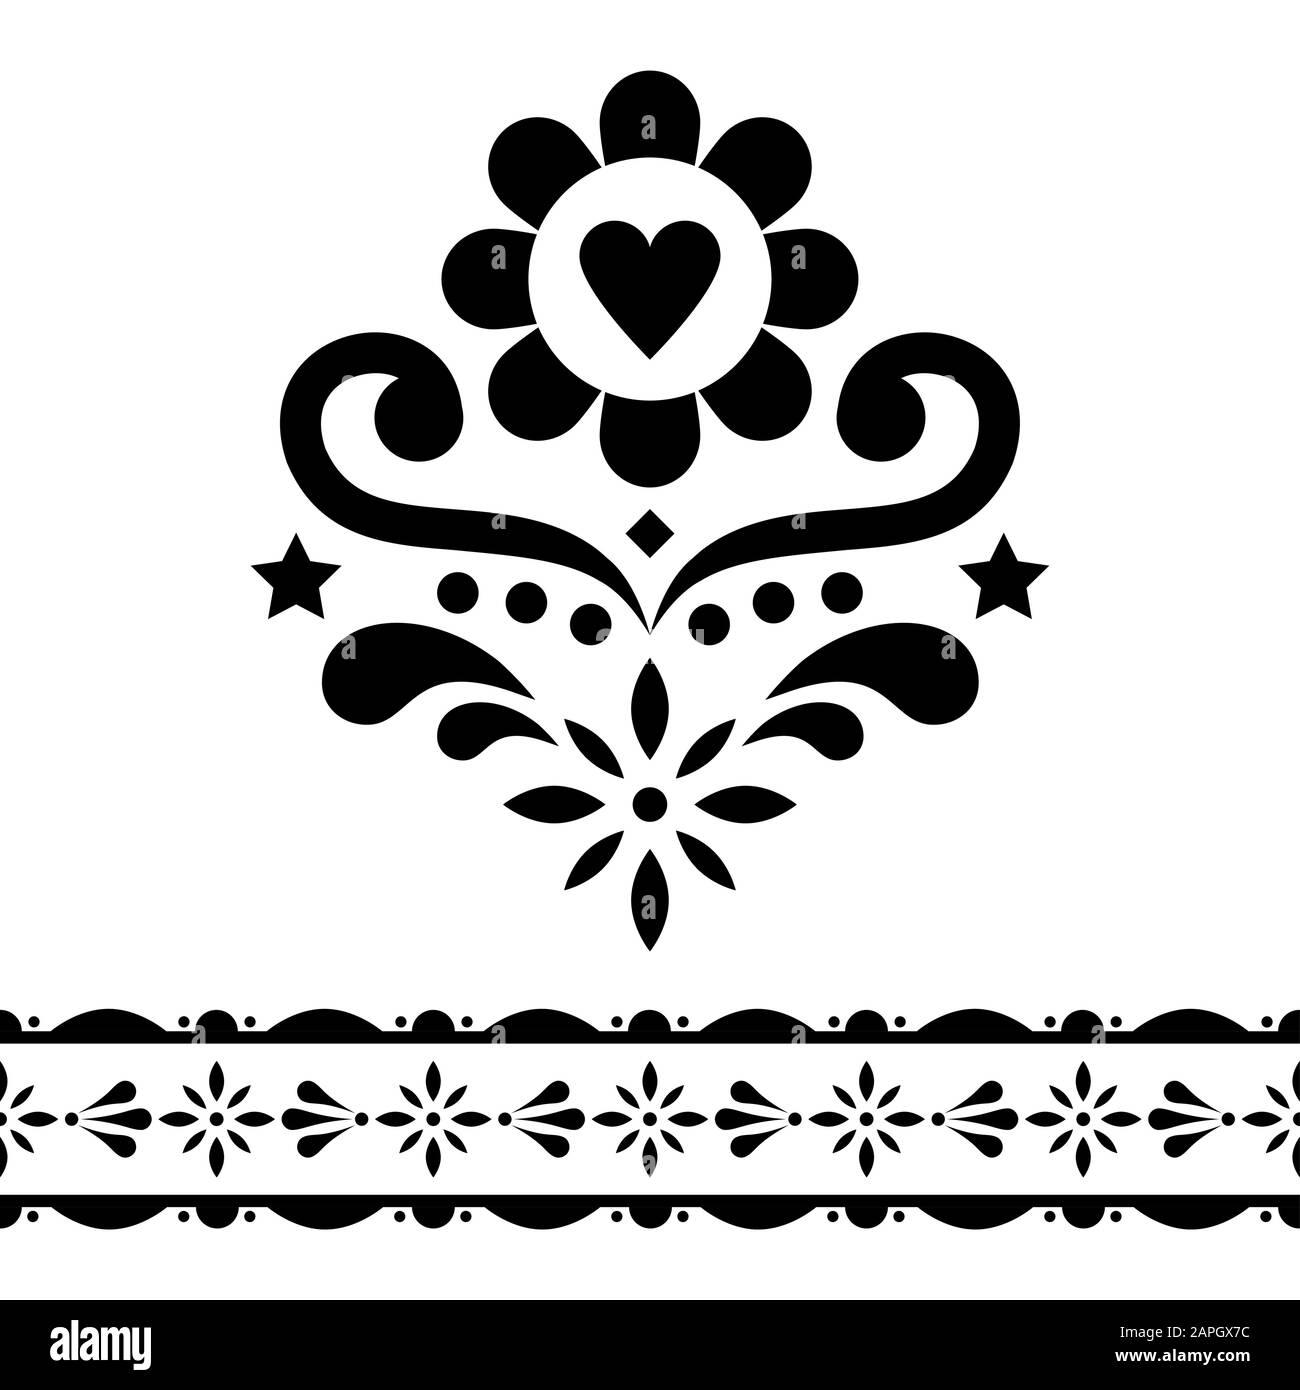 Scandinavian folk art vector design set - single patterns collection, cute floral ornament with flowers in black on white background Stock Vector